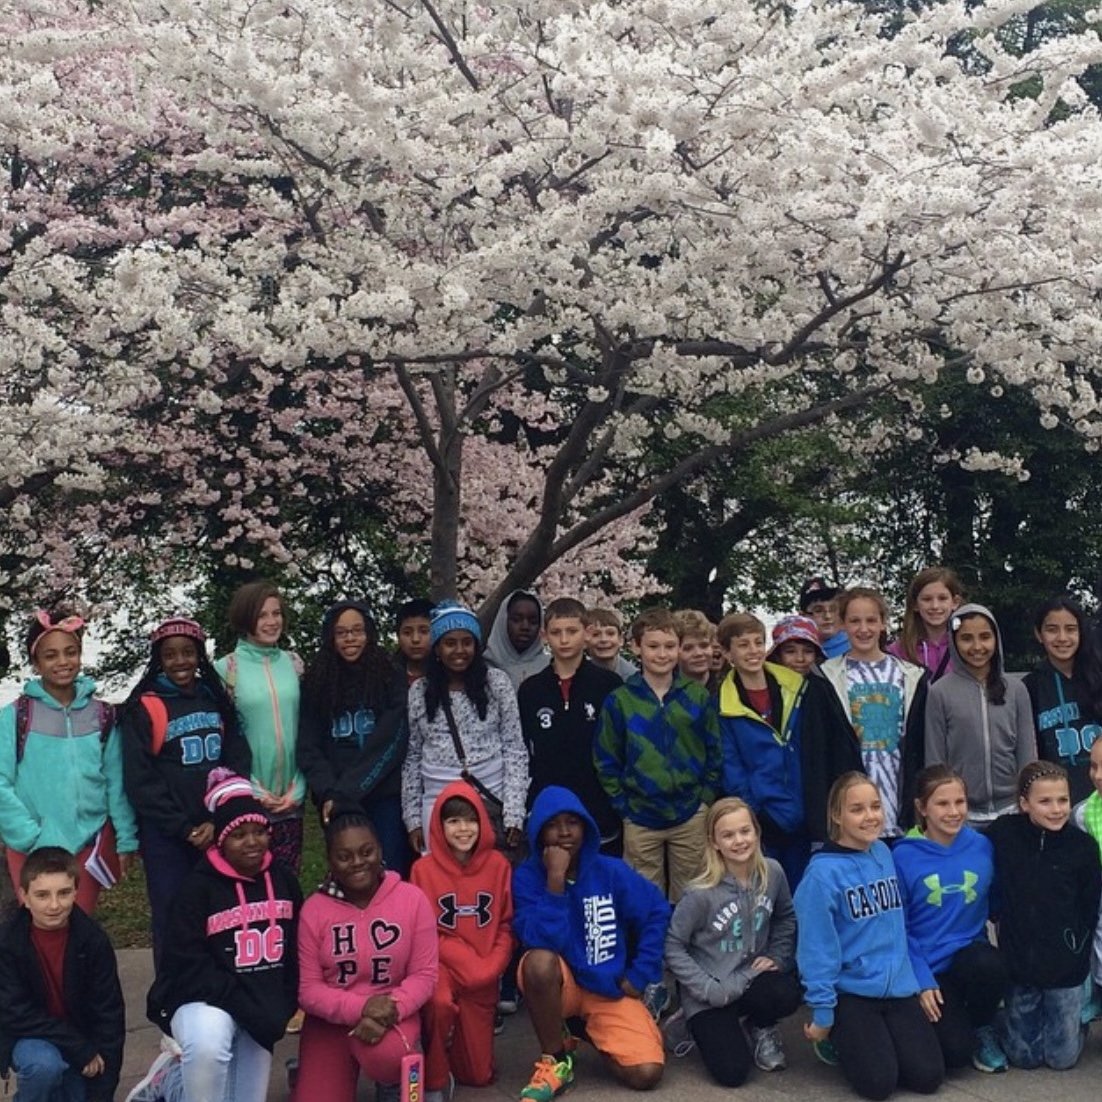  students standing under tree with cherry blossoms in a group picture wearing multiple colored Washington DC sweatshirts Fifth grade students stop for a group photo at the Tidal Basin in Washington DC under a cherry blossom tree in bloom during&nbsp;